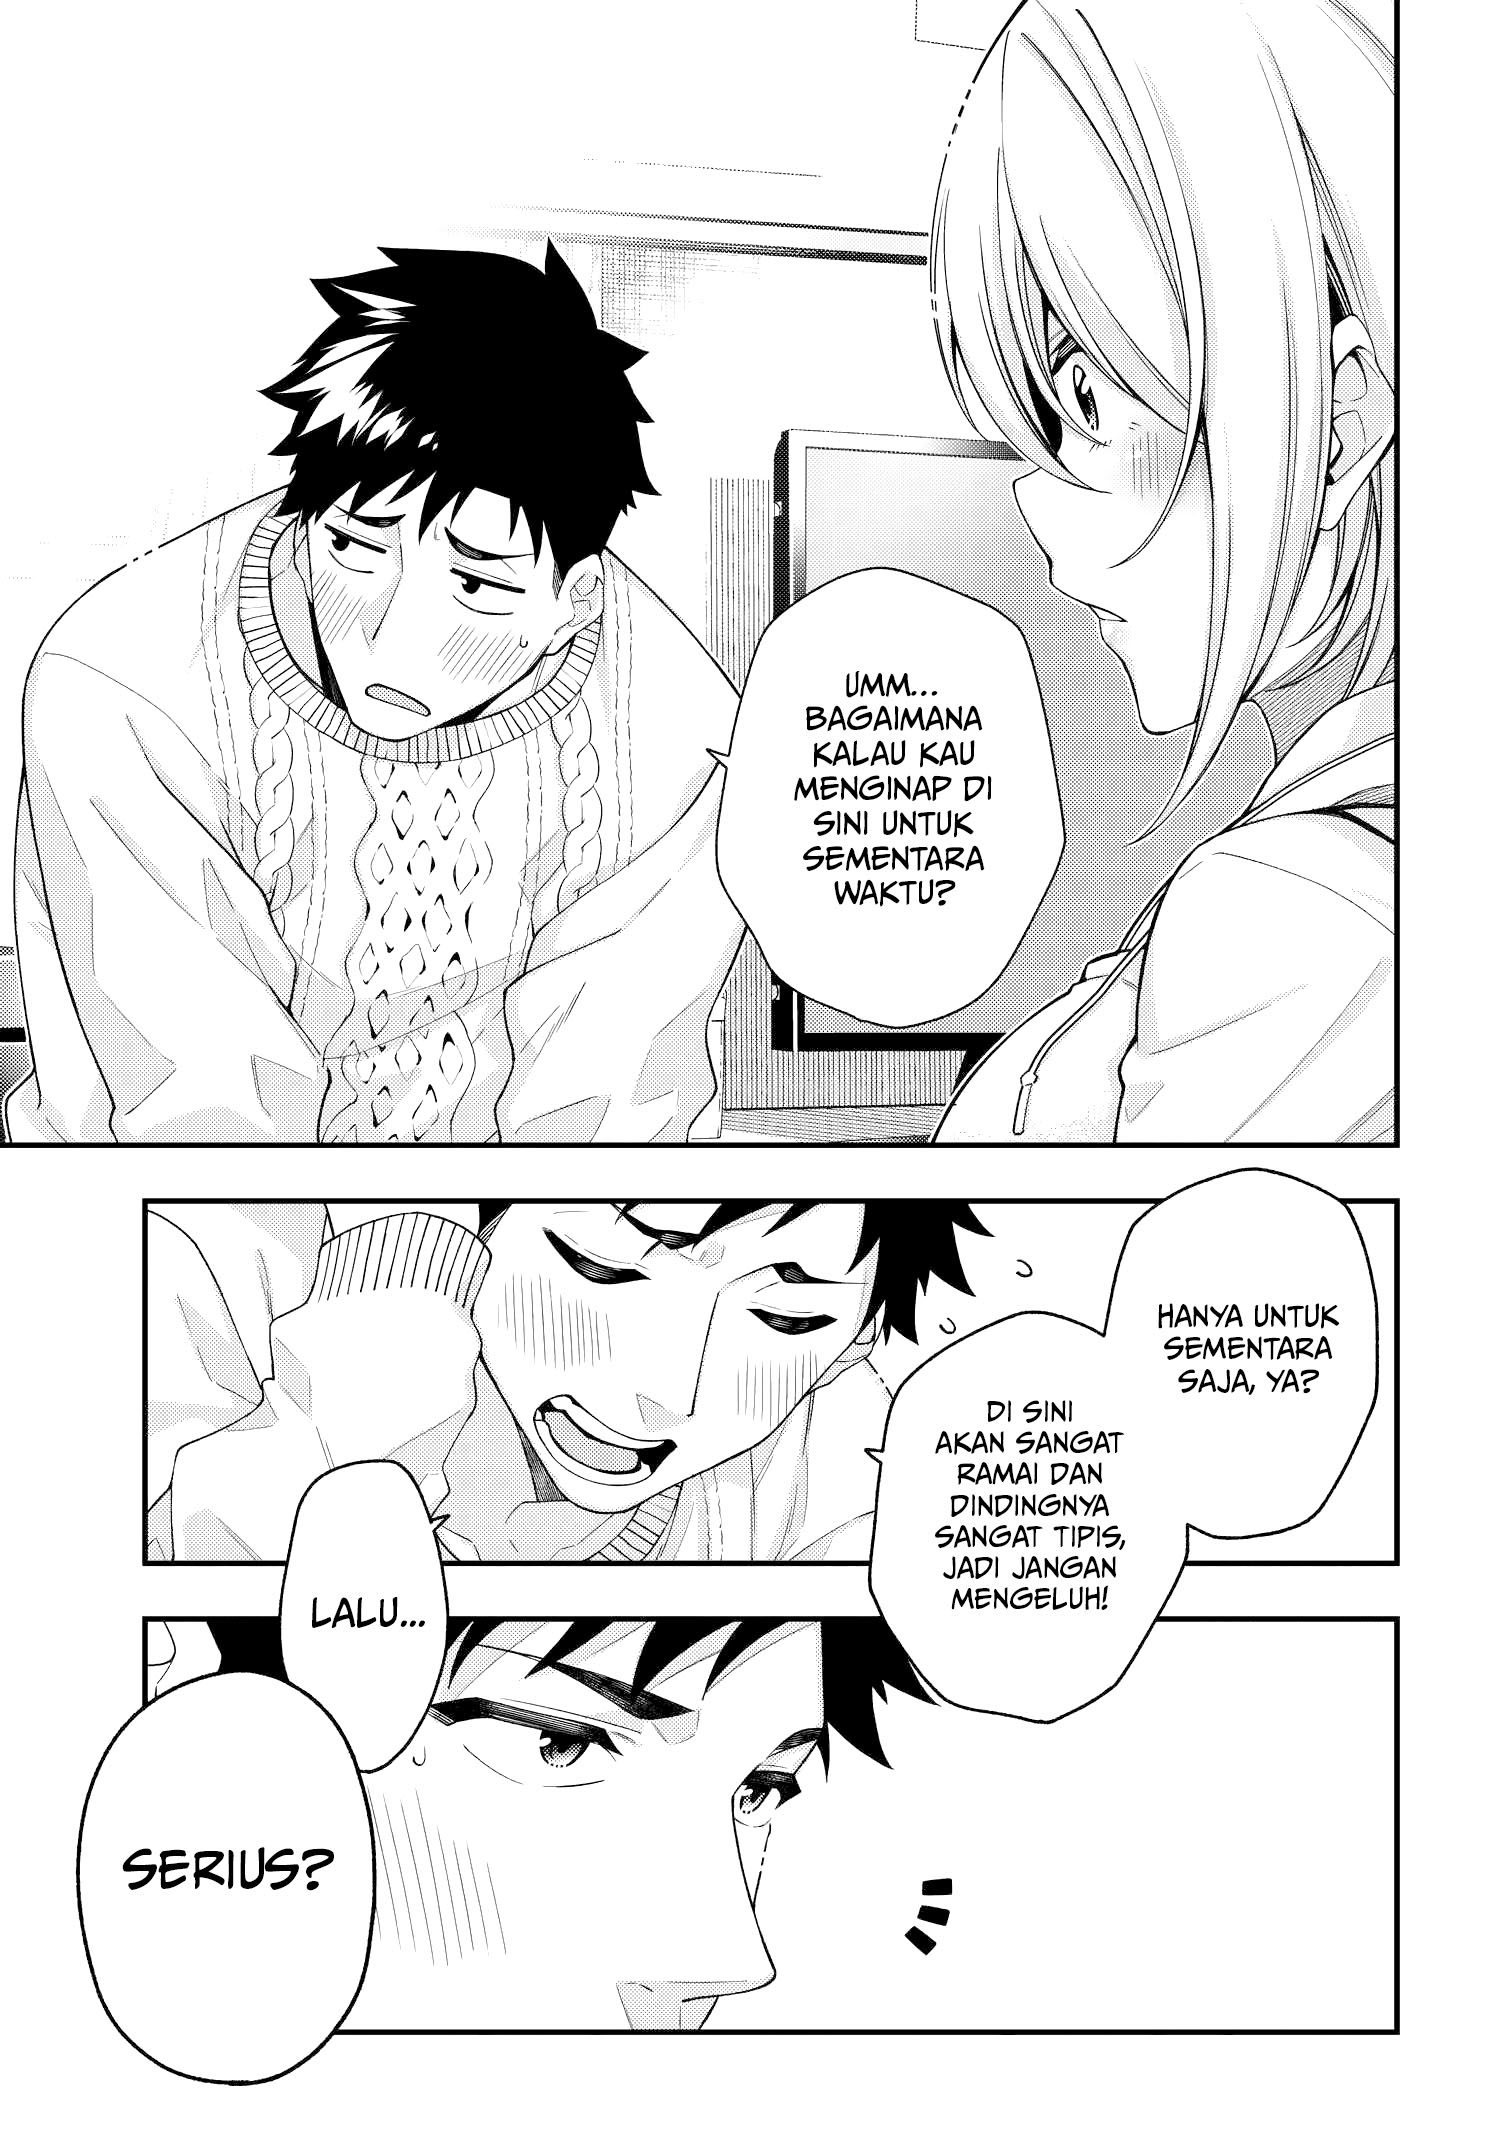 A Choice of Boyfriend and Girlfriend Chapter 02 32